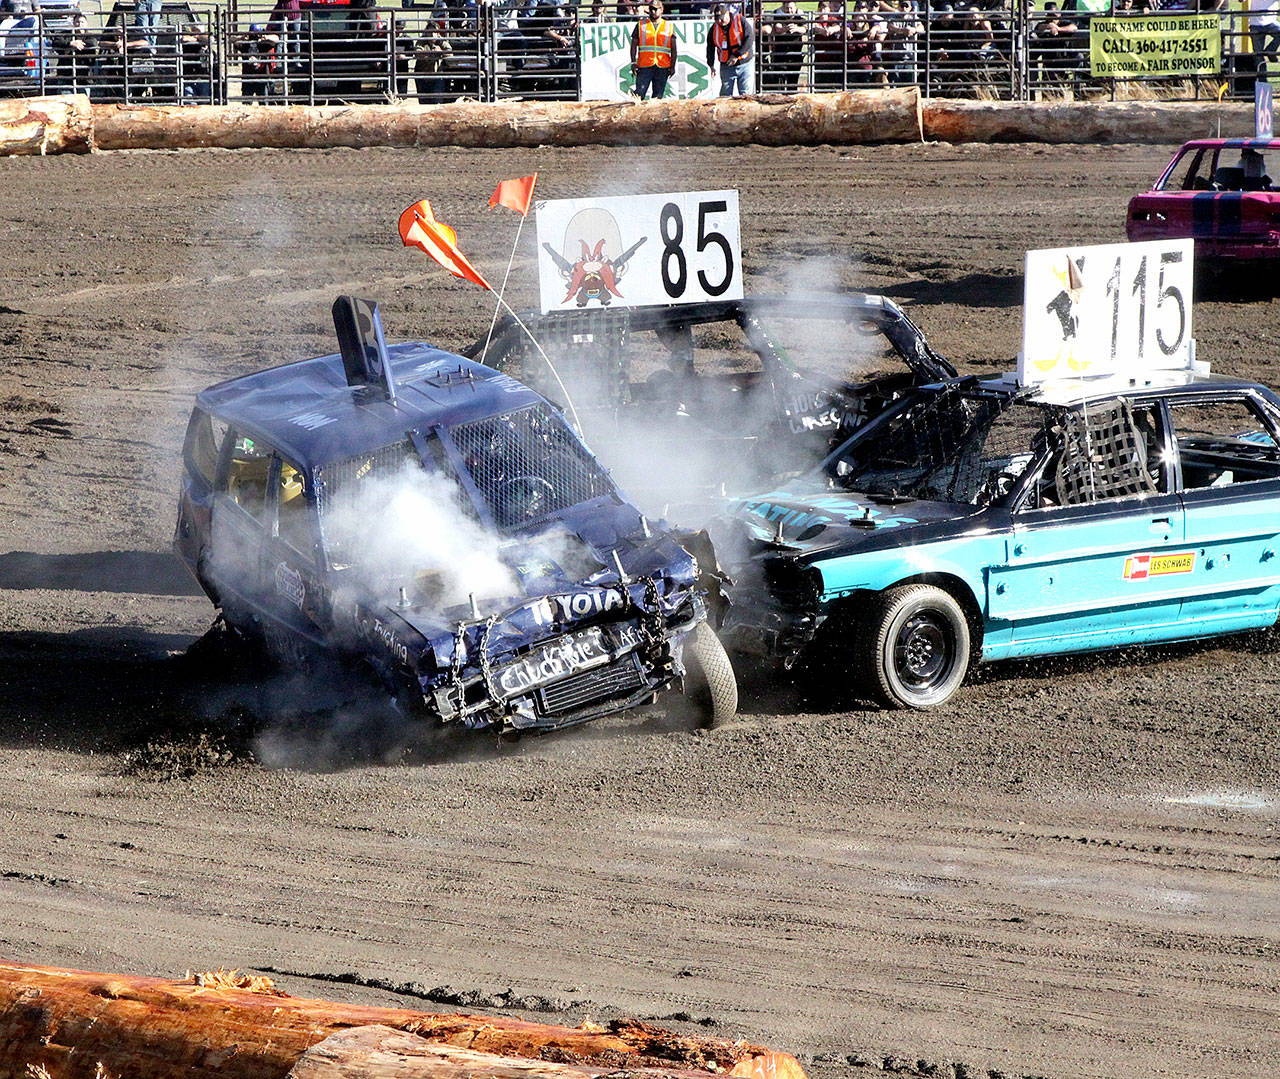 No. 115 Dylan Pieze and No. 85 Zach Bratcher put a big hit on No. 13 Ryan Michaeu of Forks in the demolition derby Sunday evening at the Clallam County Fair. It was a full house with 1,600 tickets sold for the event. (Dave Logan/for Peninsula Daily News)